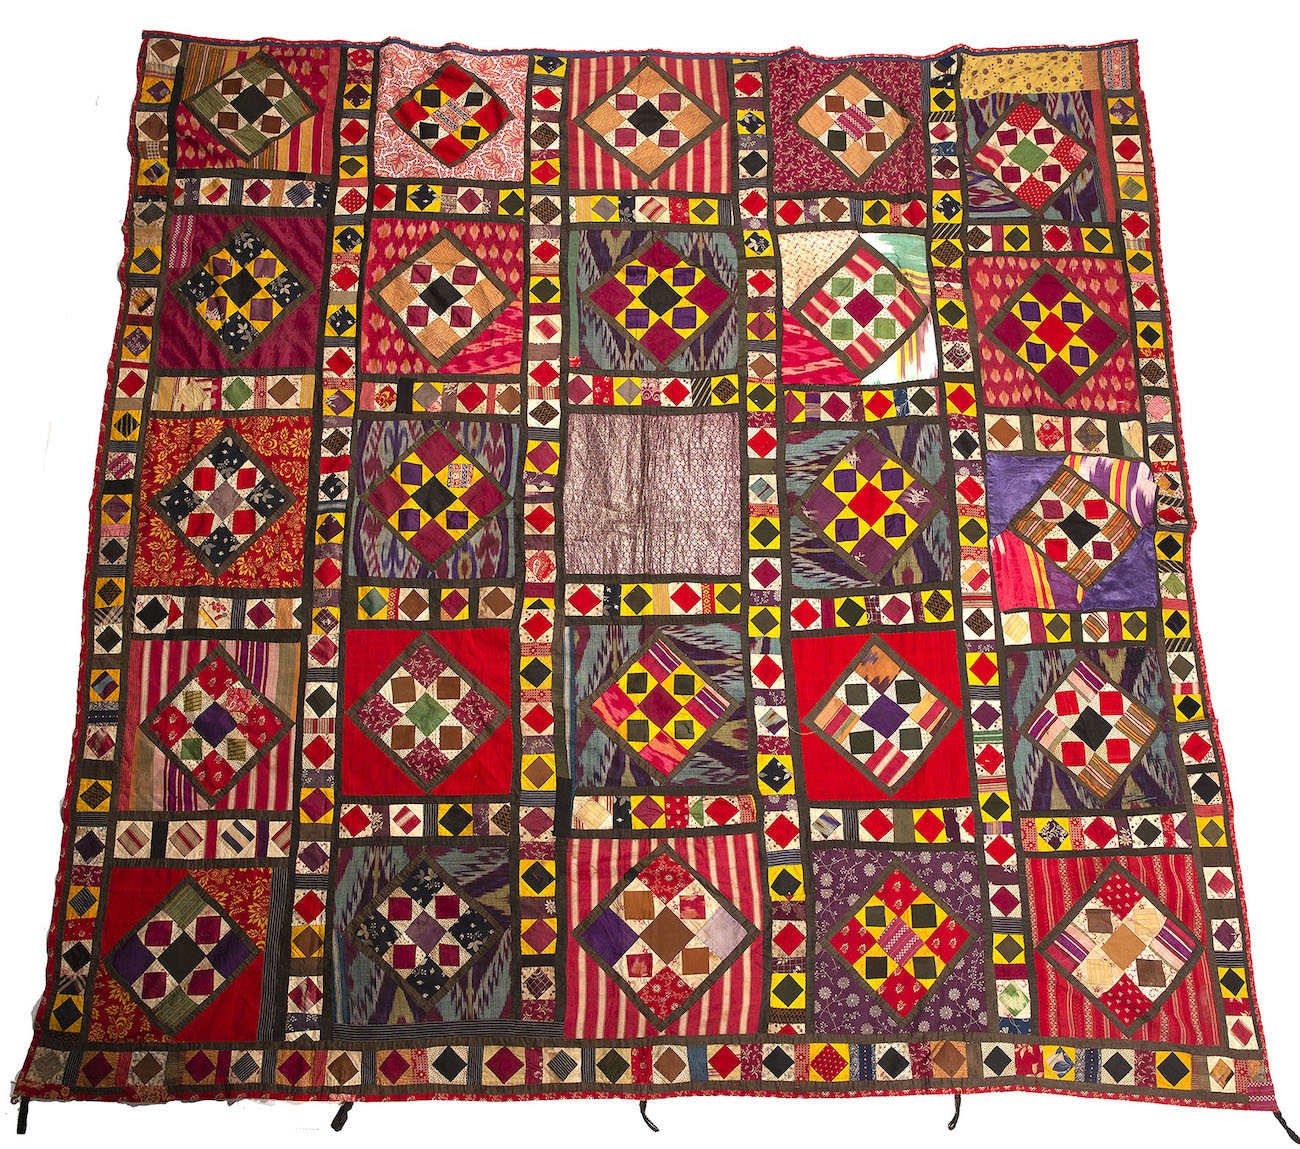 A sampler bed cover from Uzbekistan, made from scraps of old silk chapans, mostly pre-1900